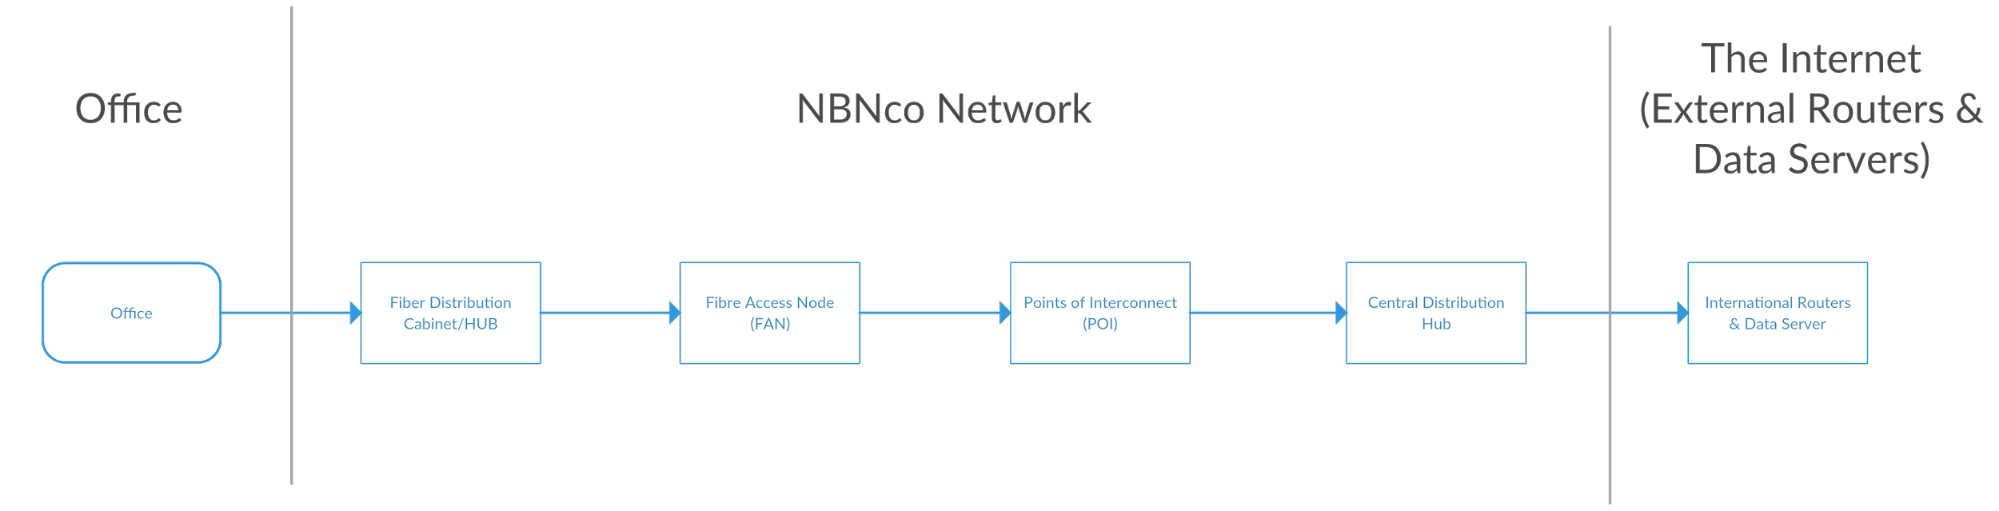 how your business connects to the internet via nbn